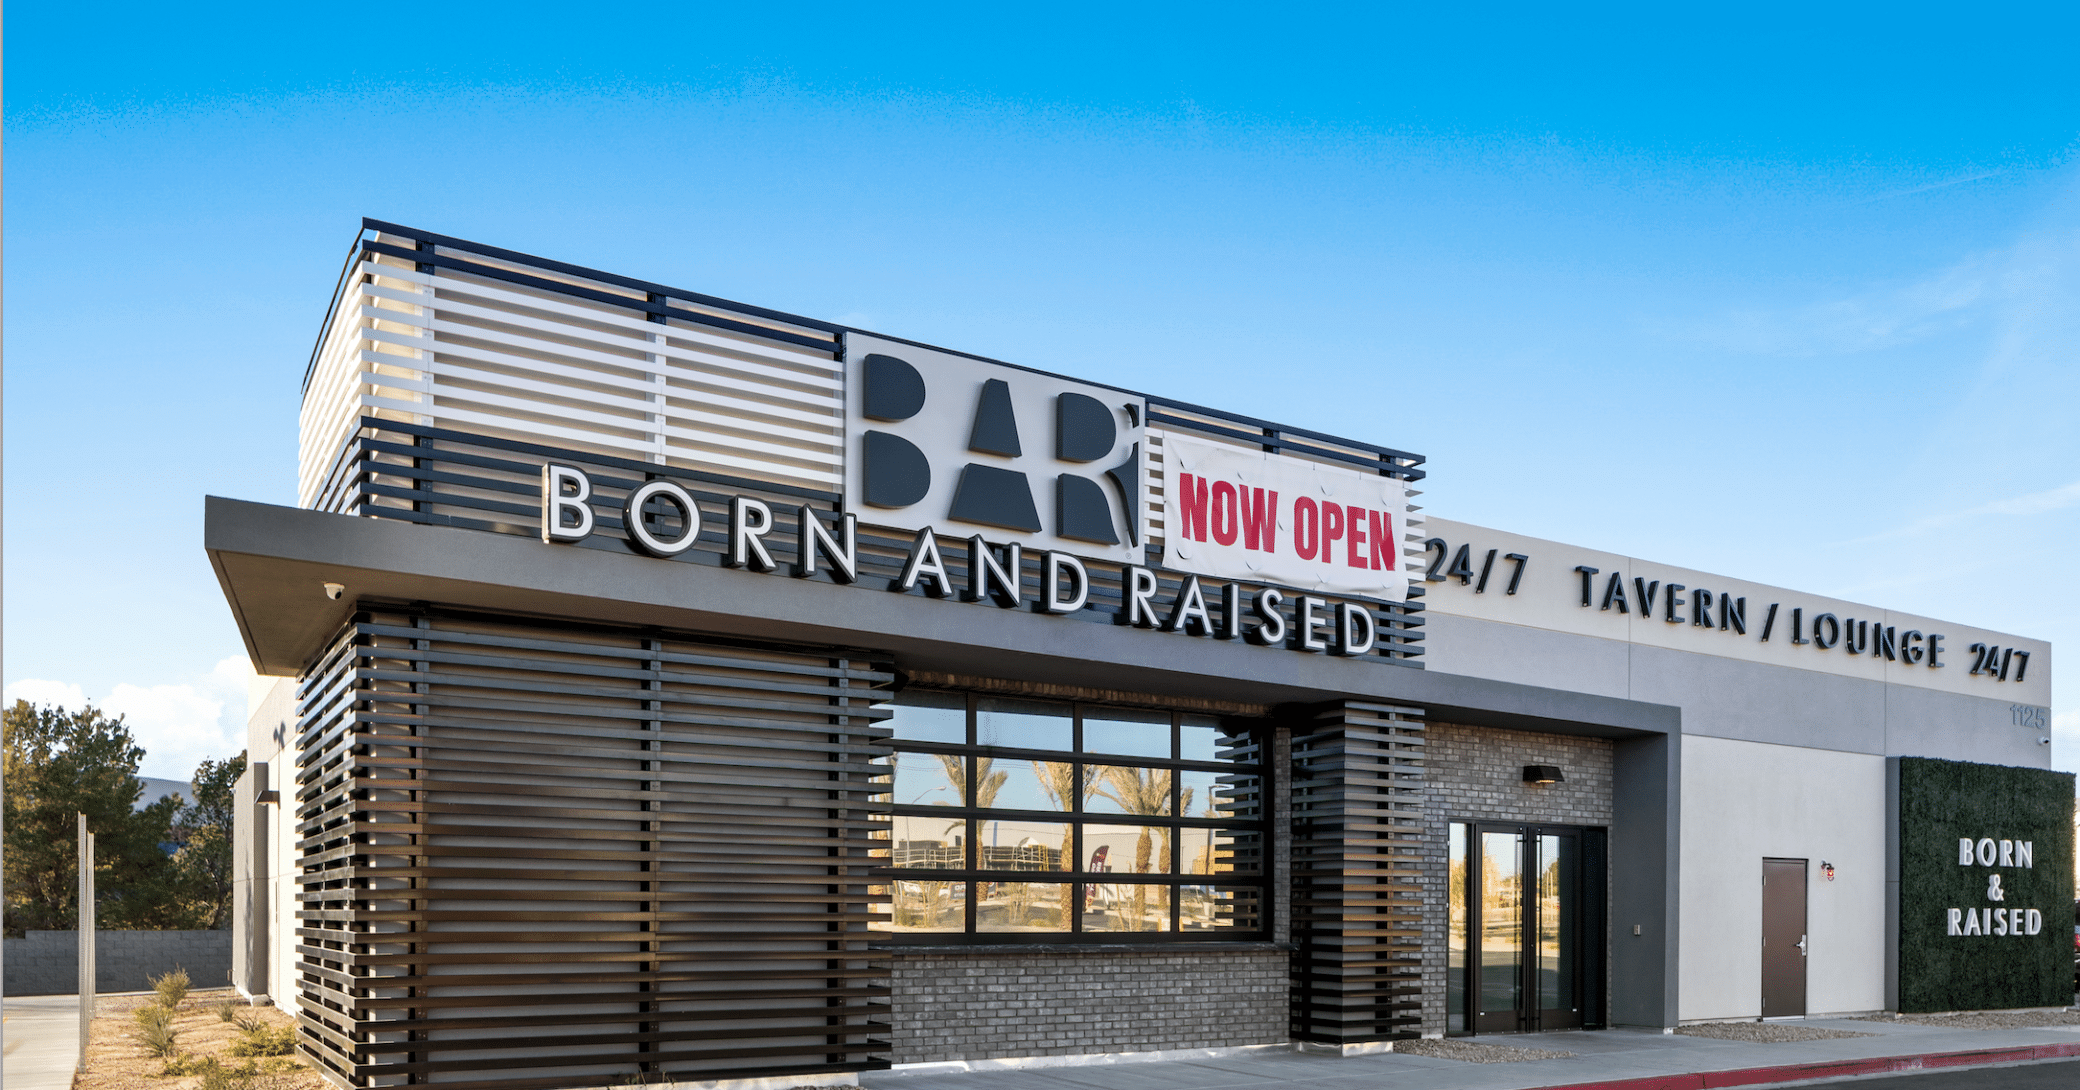 Kalb Industries completed a restaurant tenant improvement for Born and Raised.